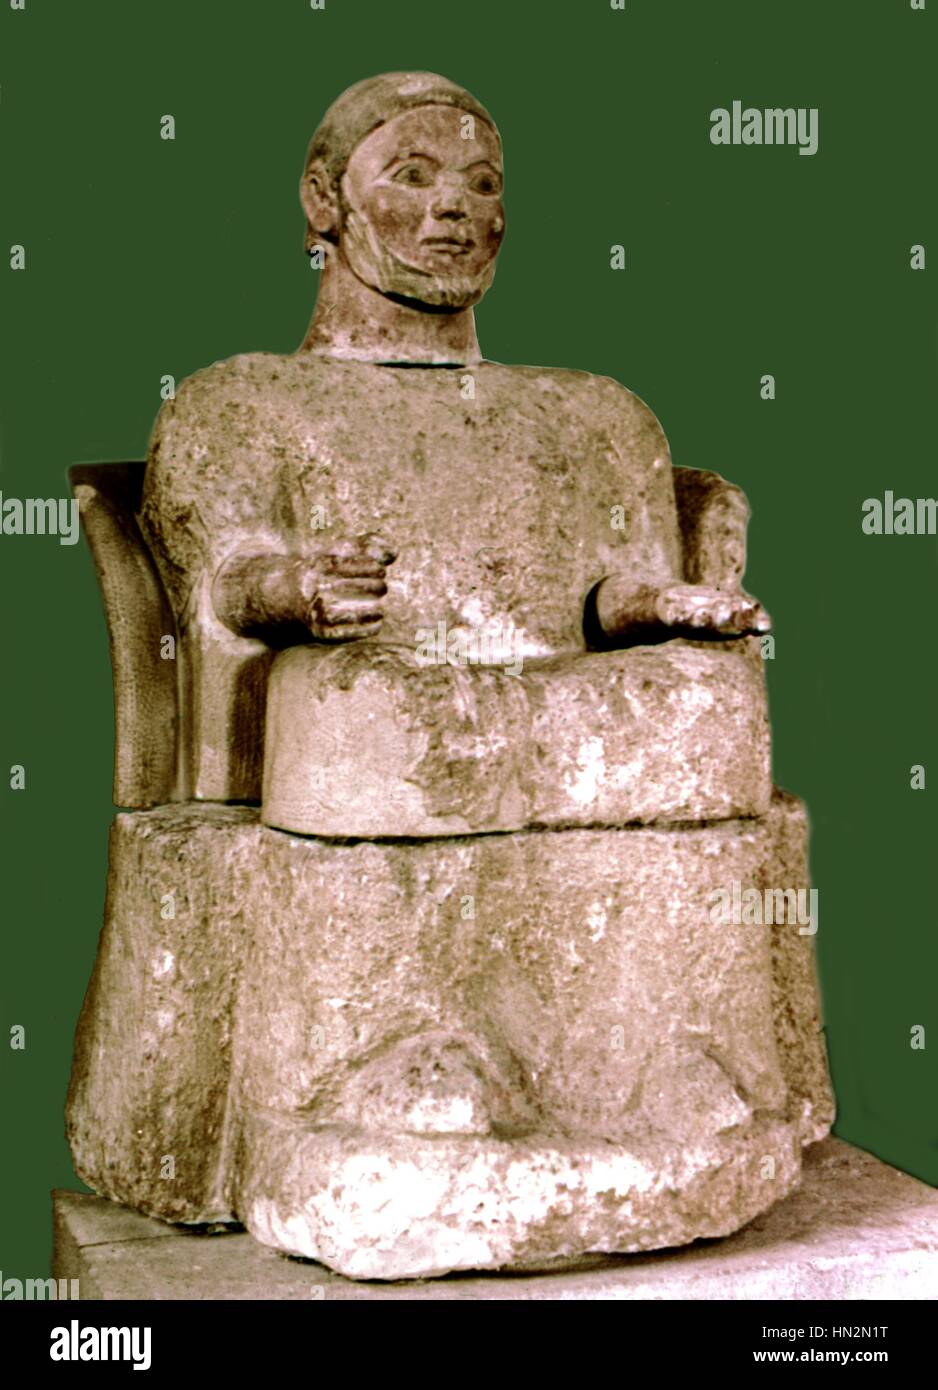 Etruscan art, cinerary statue 5th century B.C. Italy National museum of Palerma Stock Photo